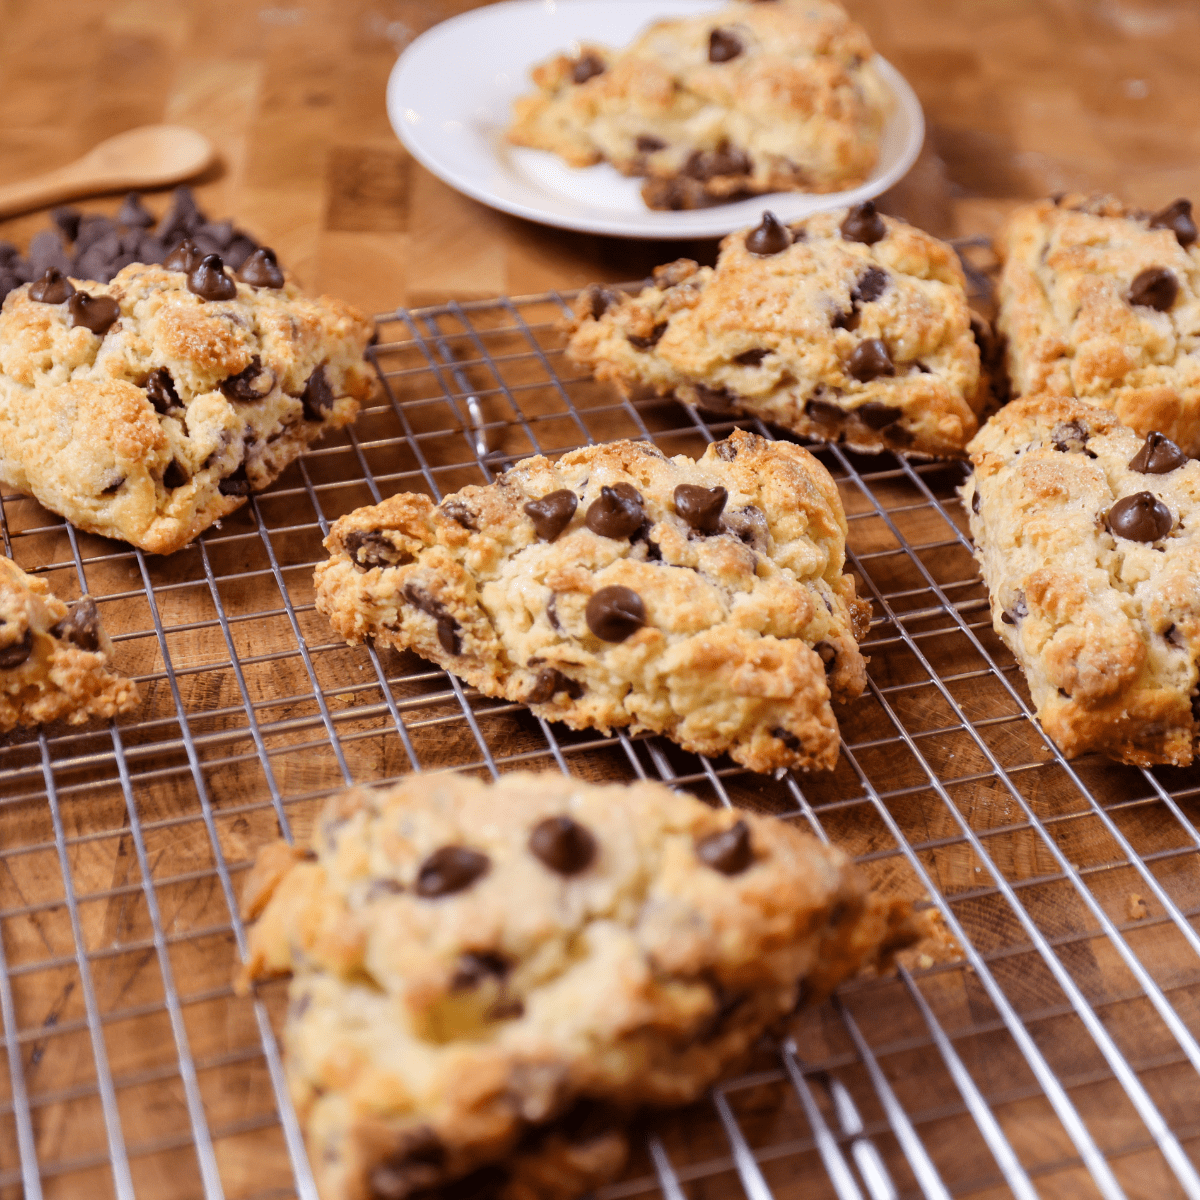 Flakey Sourdough Discard Scones With Chocolate Chips